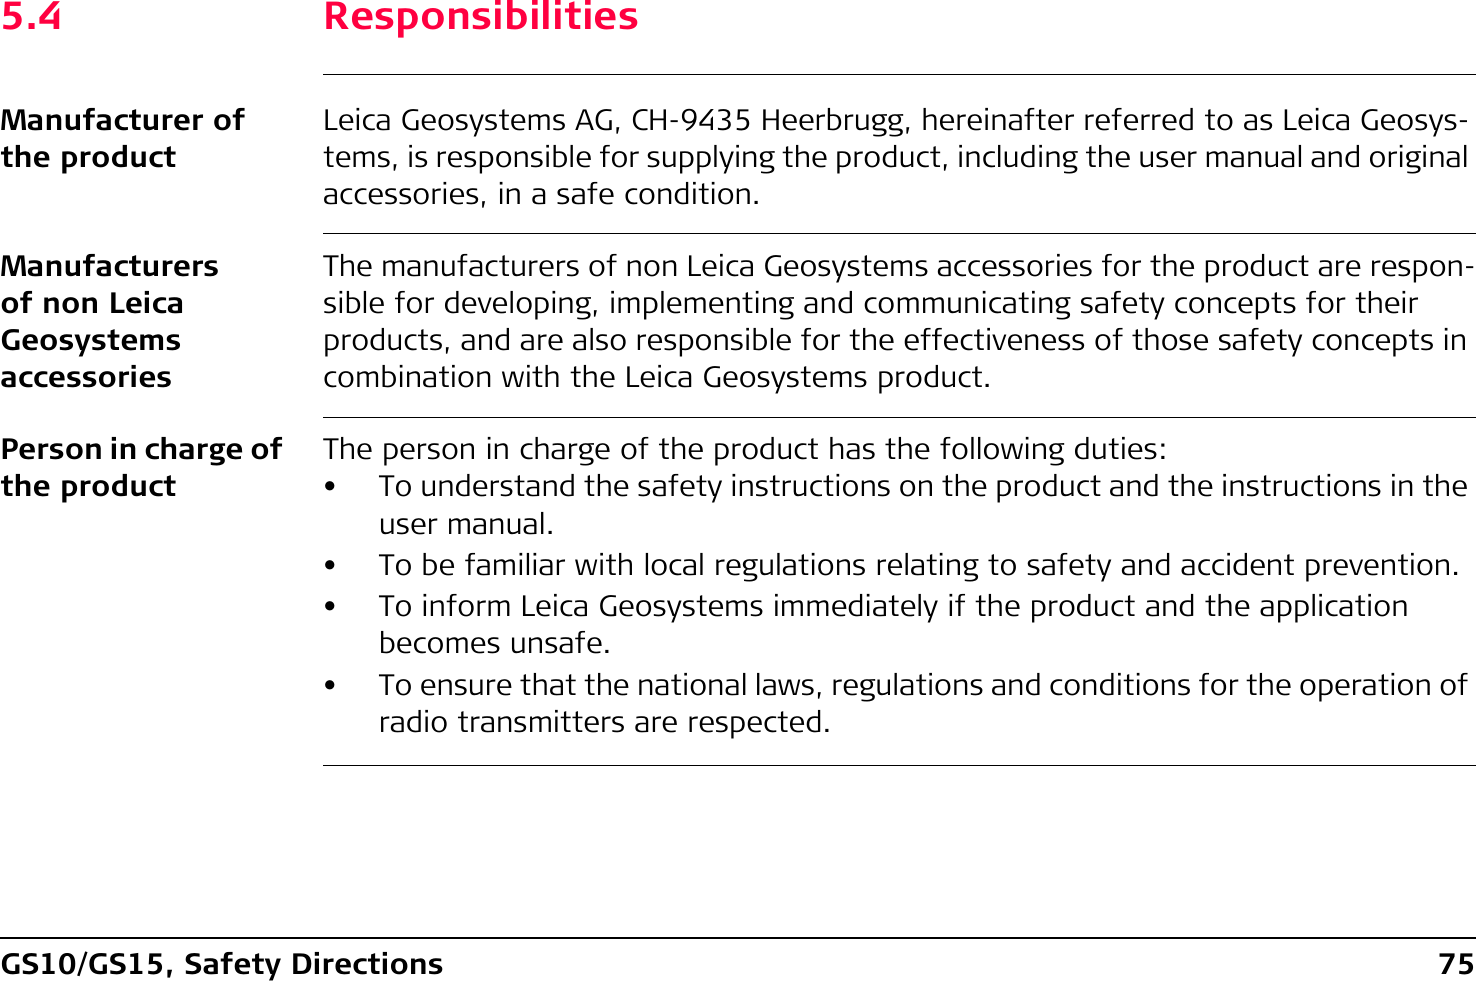 GS10/GS15, Safety Directions 755.4 ResponsibilitiesManufacturer of the productLeica Geosystems AG, CH-9435 Heerbrugg, hereinafter referred to as Leica Geosys-tems, is responsible for supplying the product, including the user manual and original accessories, in a safe condition.Manufacturers of non Leica Geosystems accessoriesThe manufacturers of non Leica Geosystems accessories for the product are respon-sible for developing, implementing and communicating safety concepts for their products, and are also responsible for the effectiveness of those safety concepts in combination with the Leica Geosystems product.Person in charge of the productThe person in charge of the product has the following duties:• To understand the safety instructions on the product and the instructions in the user manual.• To be familiar with local regulations relating to safety and accident prevention.• To inform Leica Geosystems immediately if the product and the application becomes unsafe.• To ensure that the national laws, regulations and conditions for the operation of radio transmitters are respected.